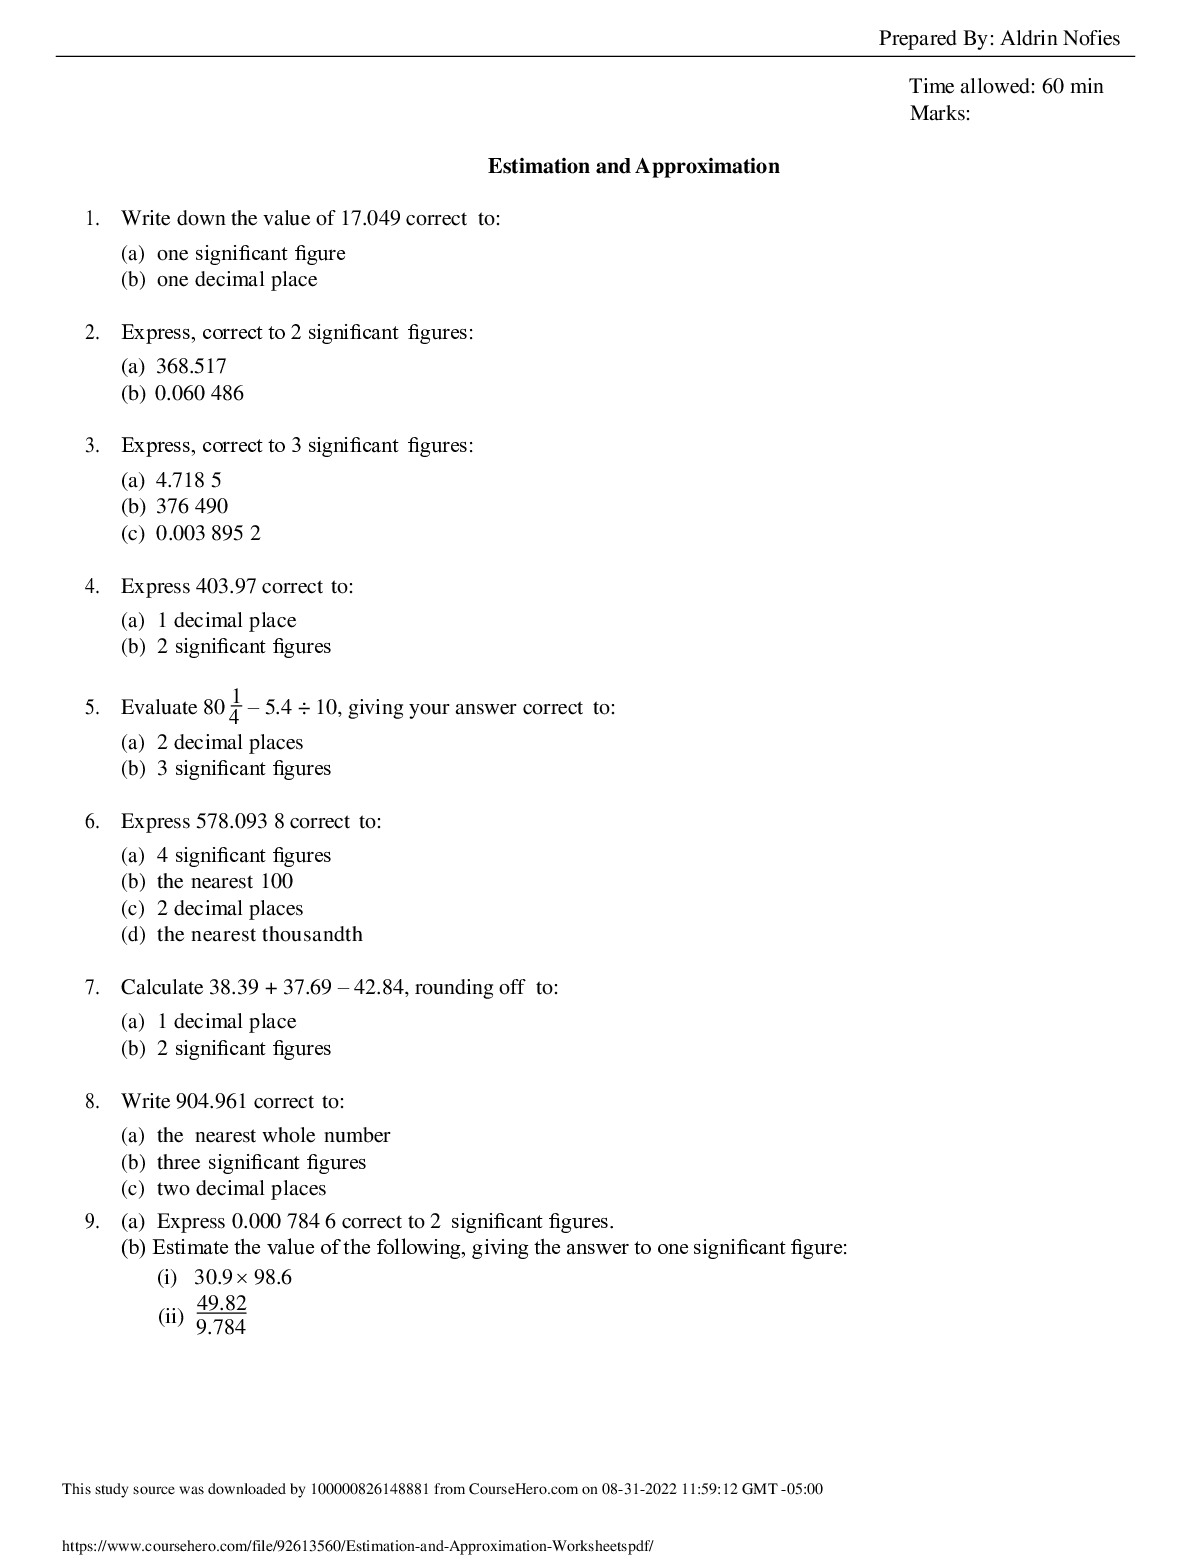 Estimation_and_Approximation_Worksheets.pdf